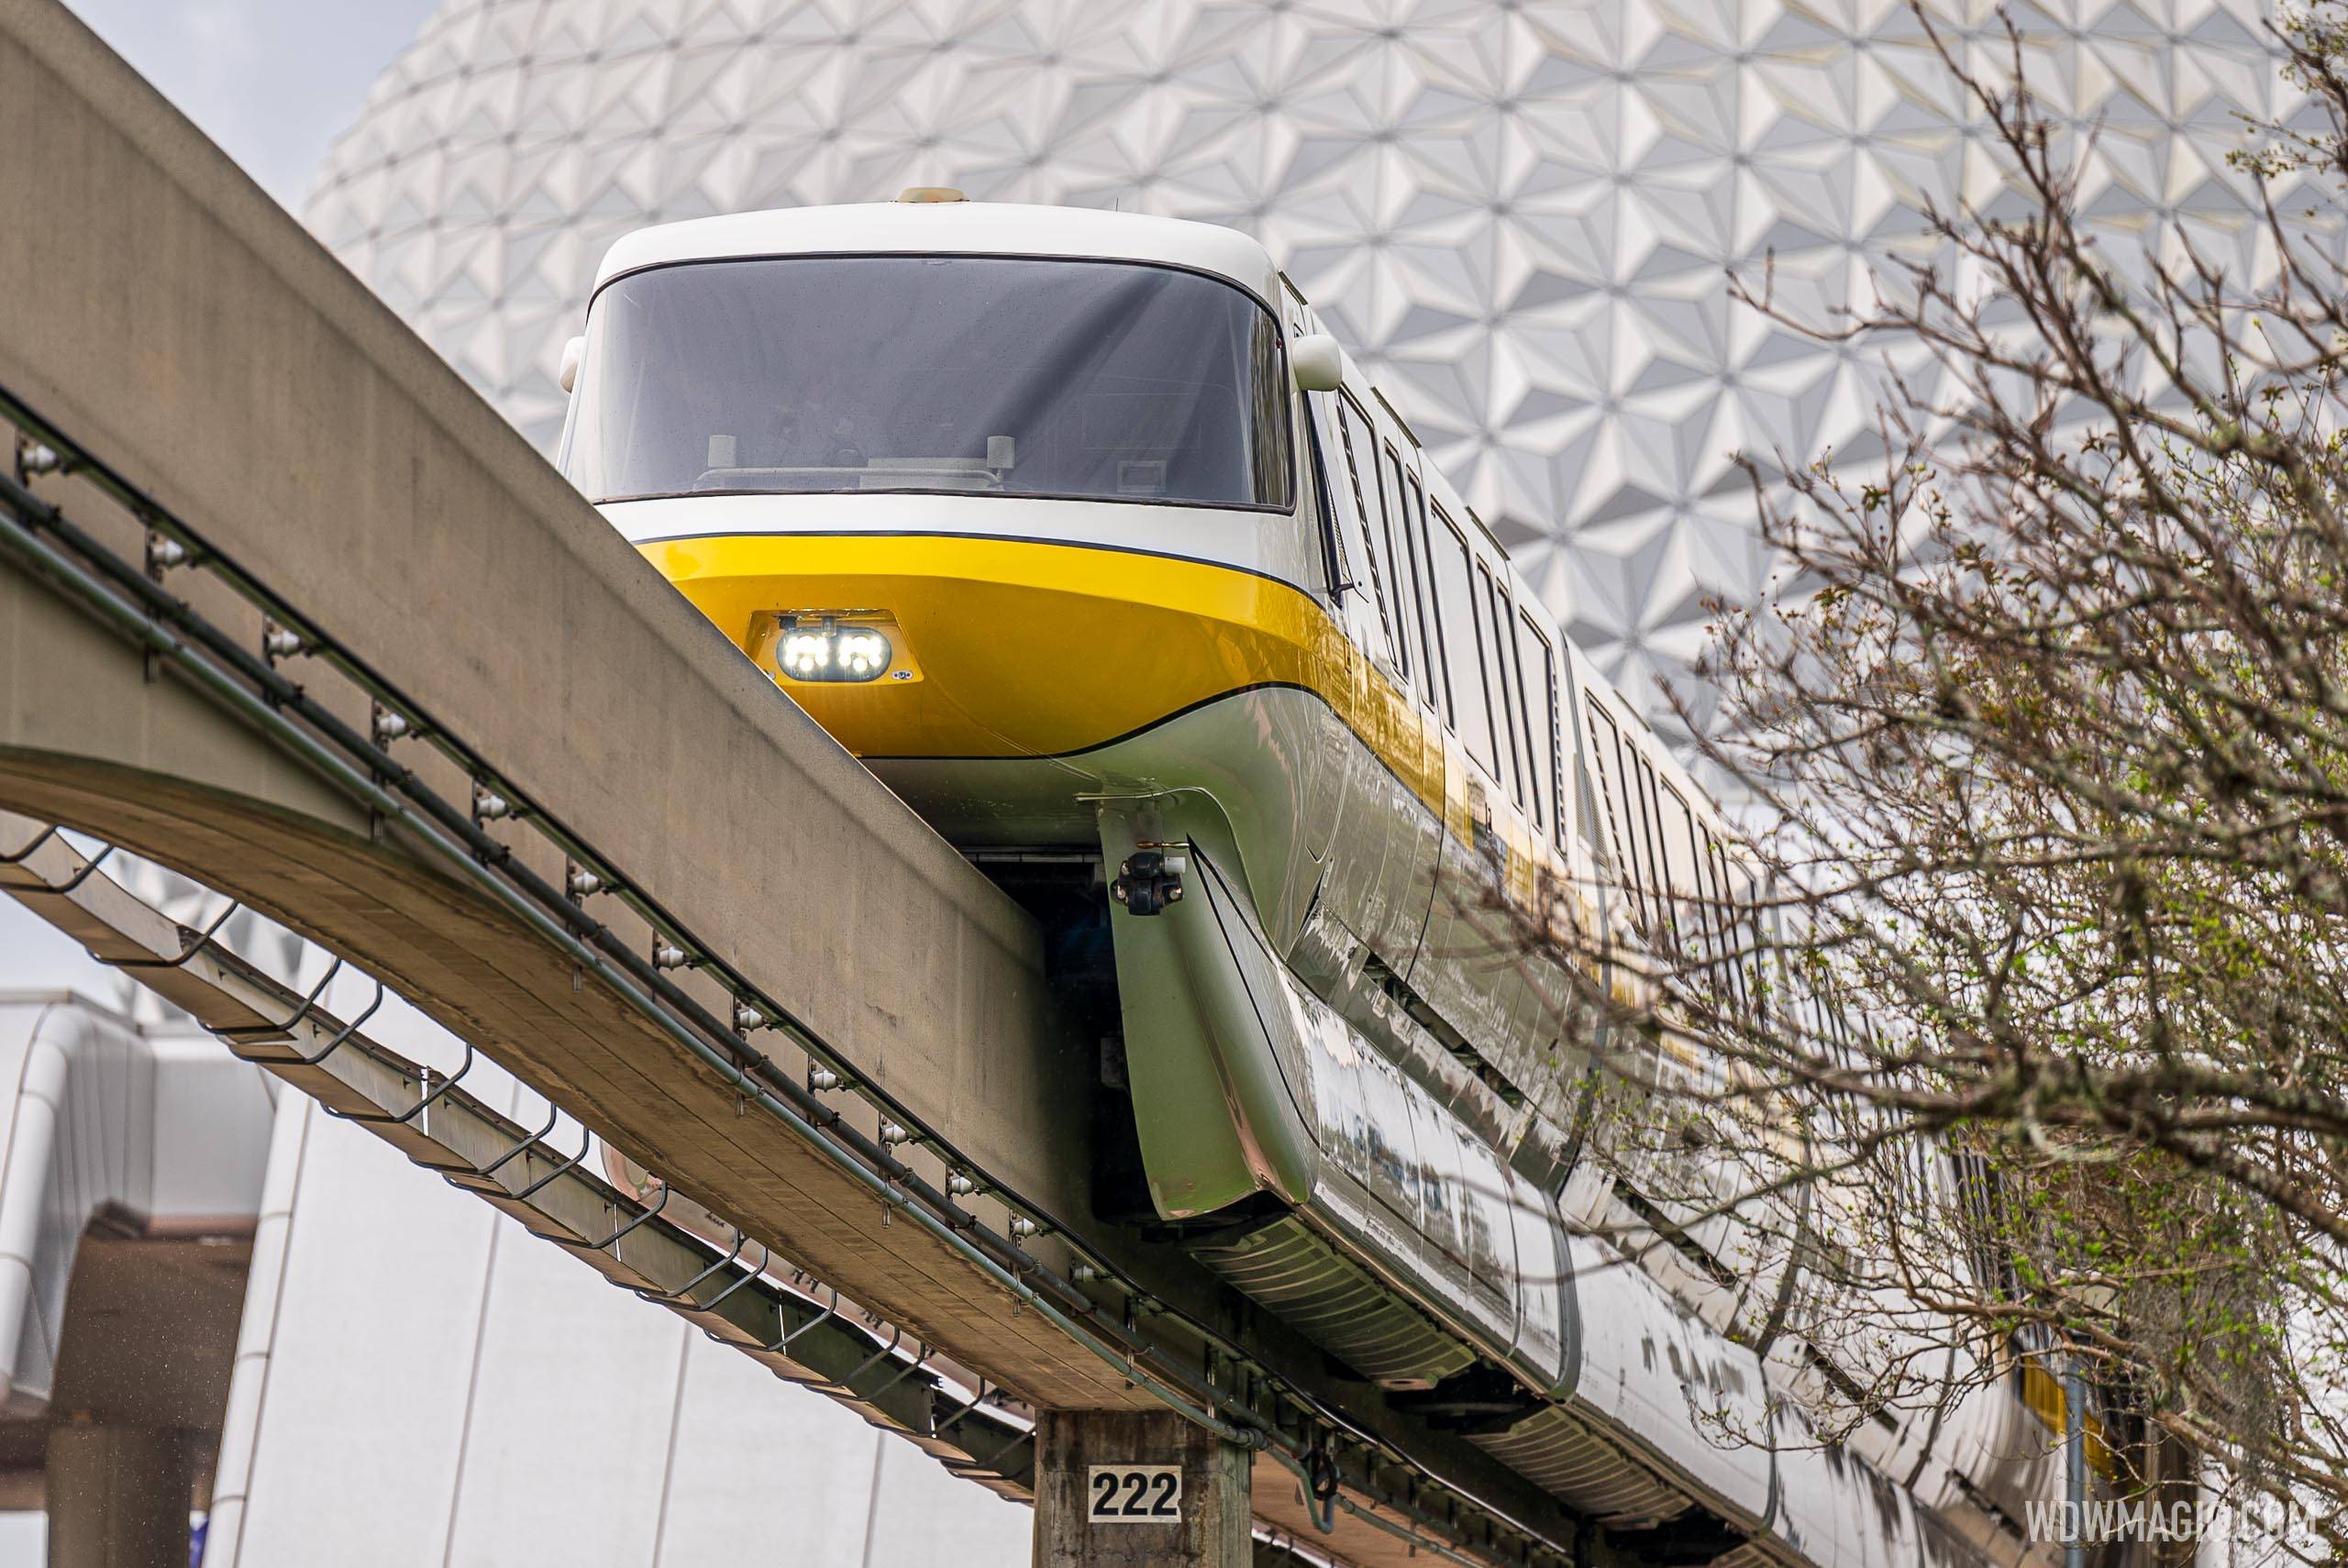 Walt Disney World's monorail will have a delayed opening on Friday July 14